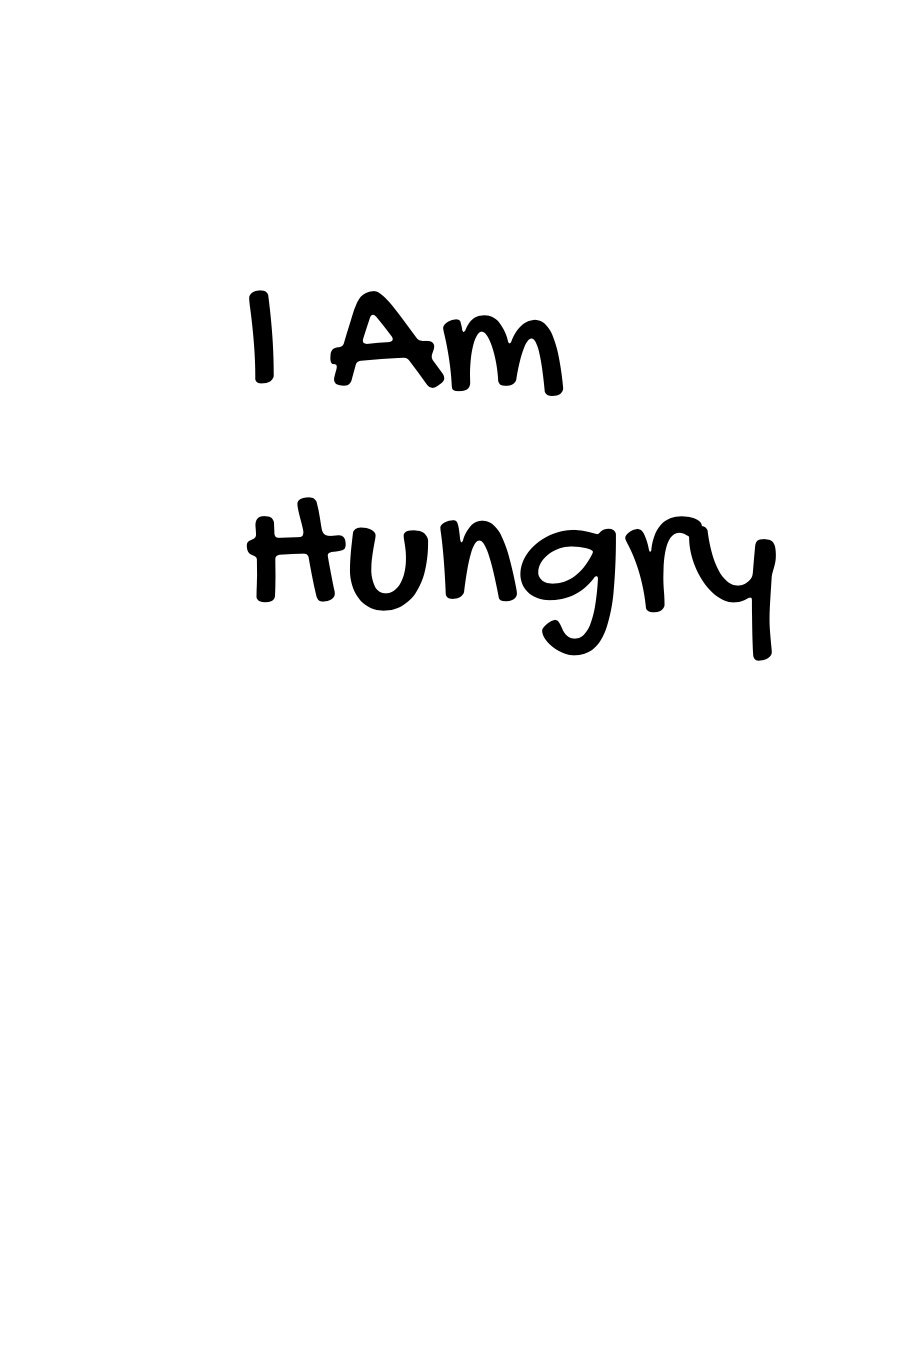 I am Hungry by Tyler O